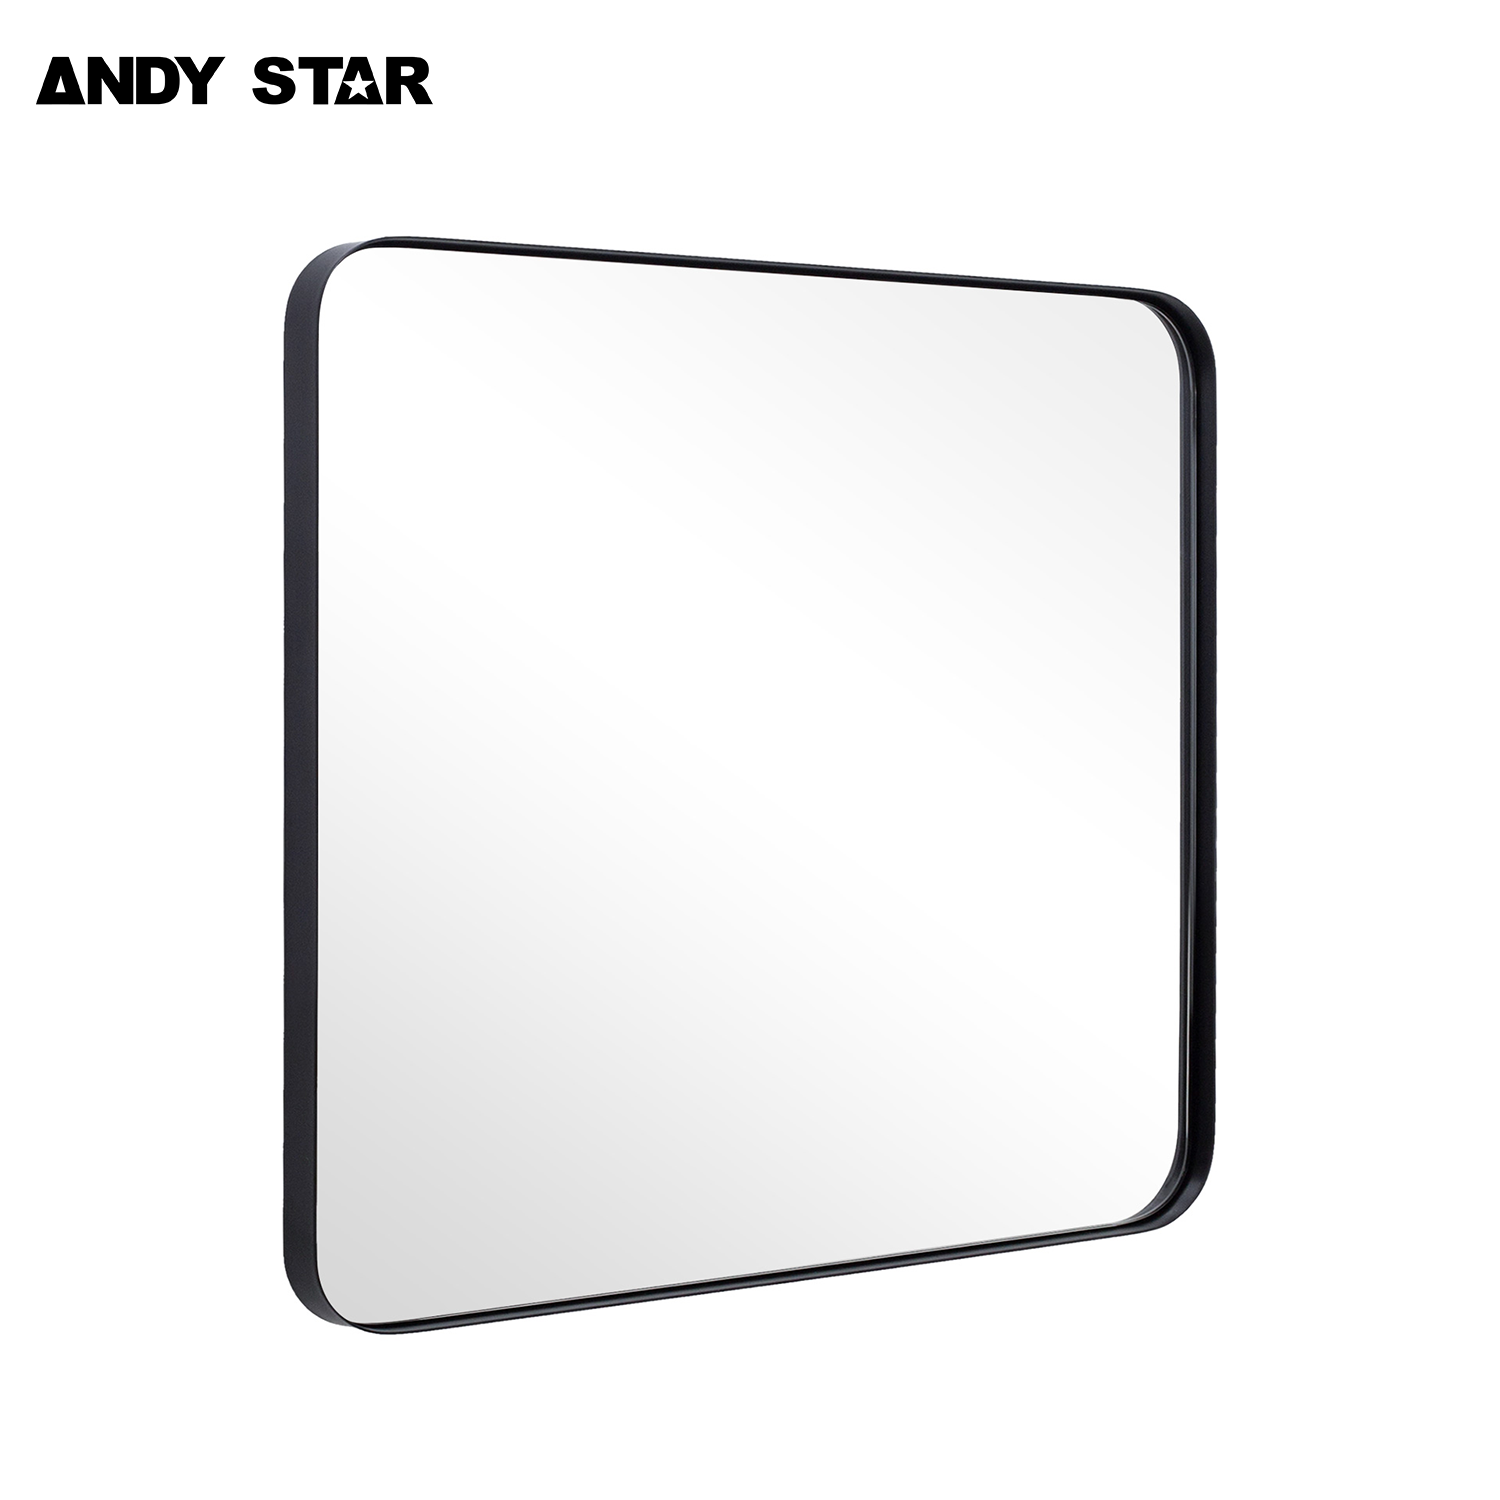 ANDY STAR Square Bathroom Mirror, Wall Decor Circle Mirror with Stainless Steel Frame